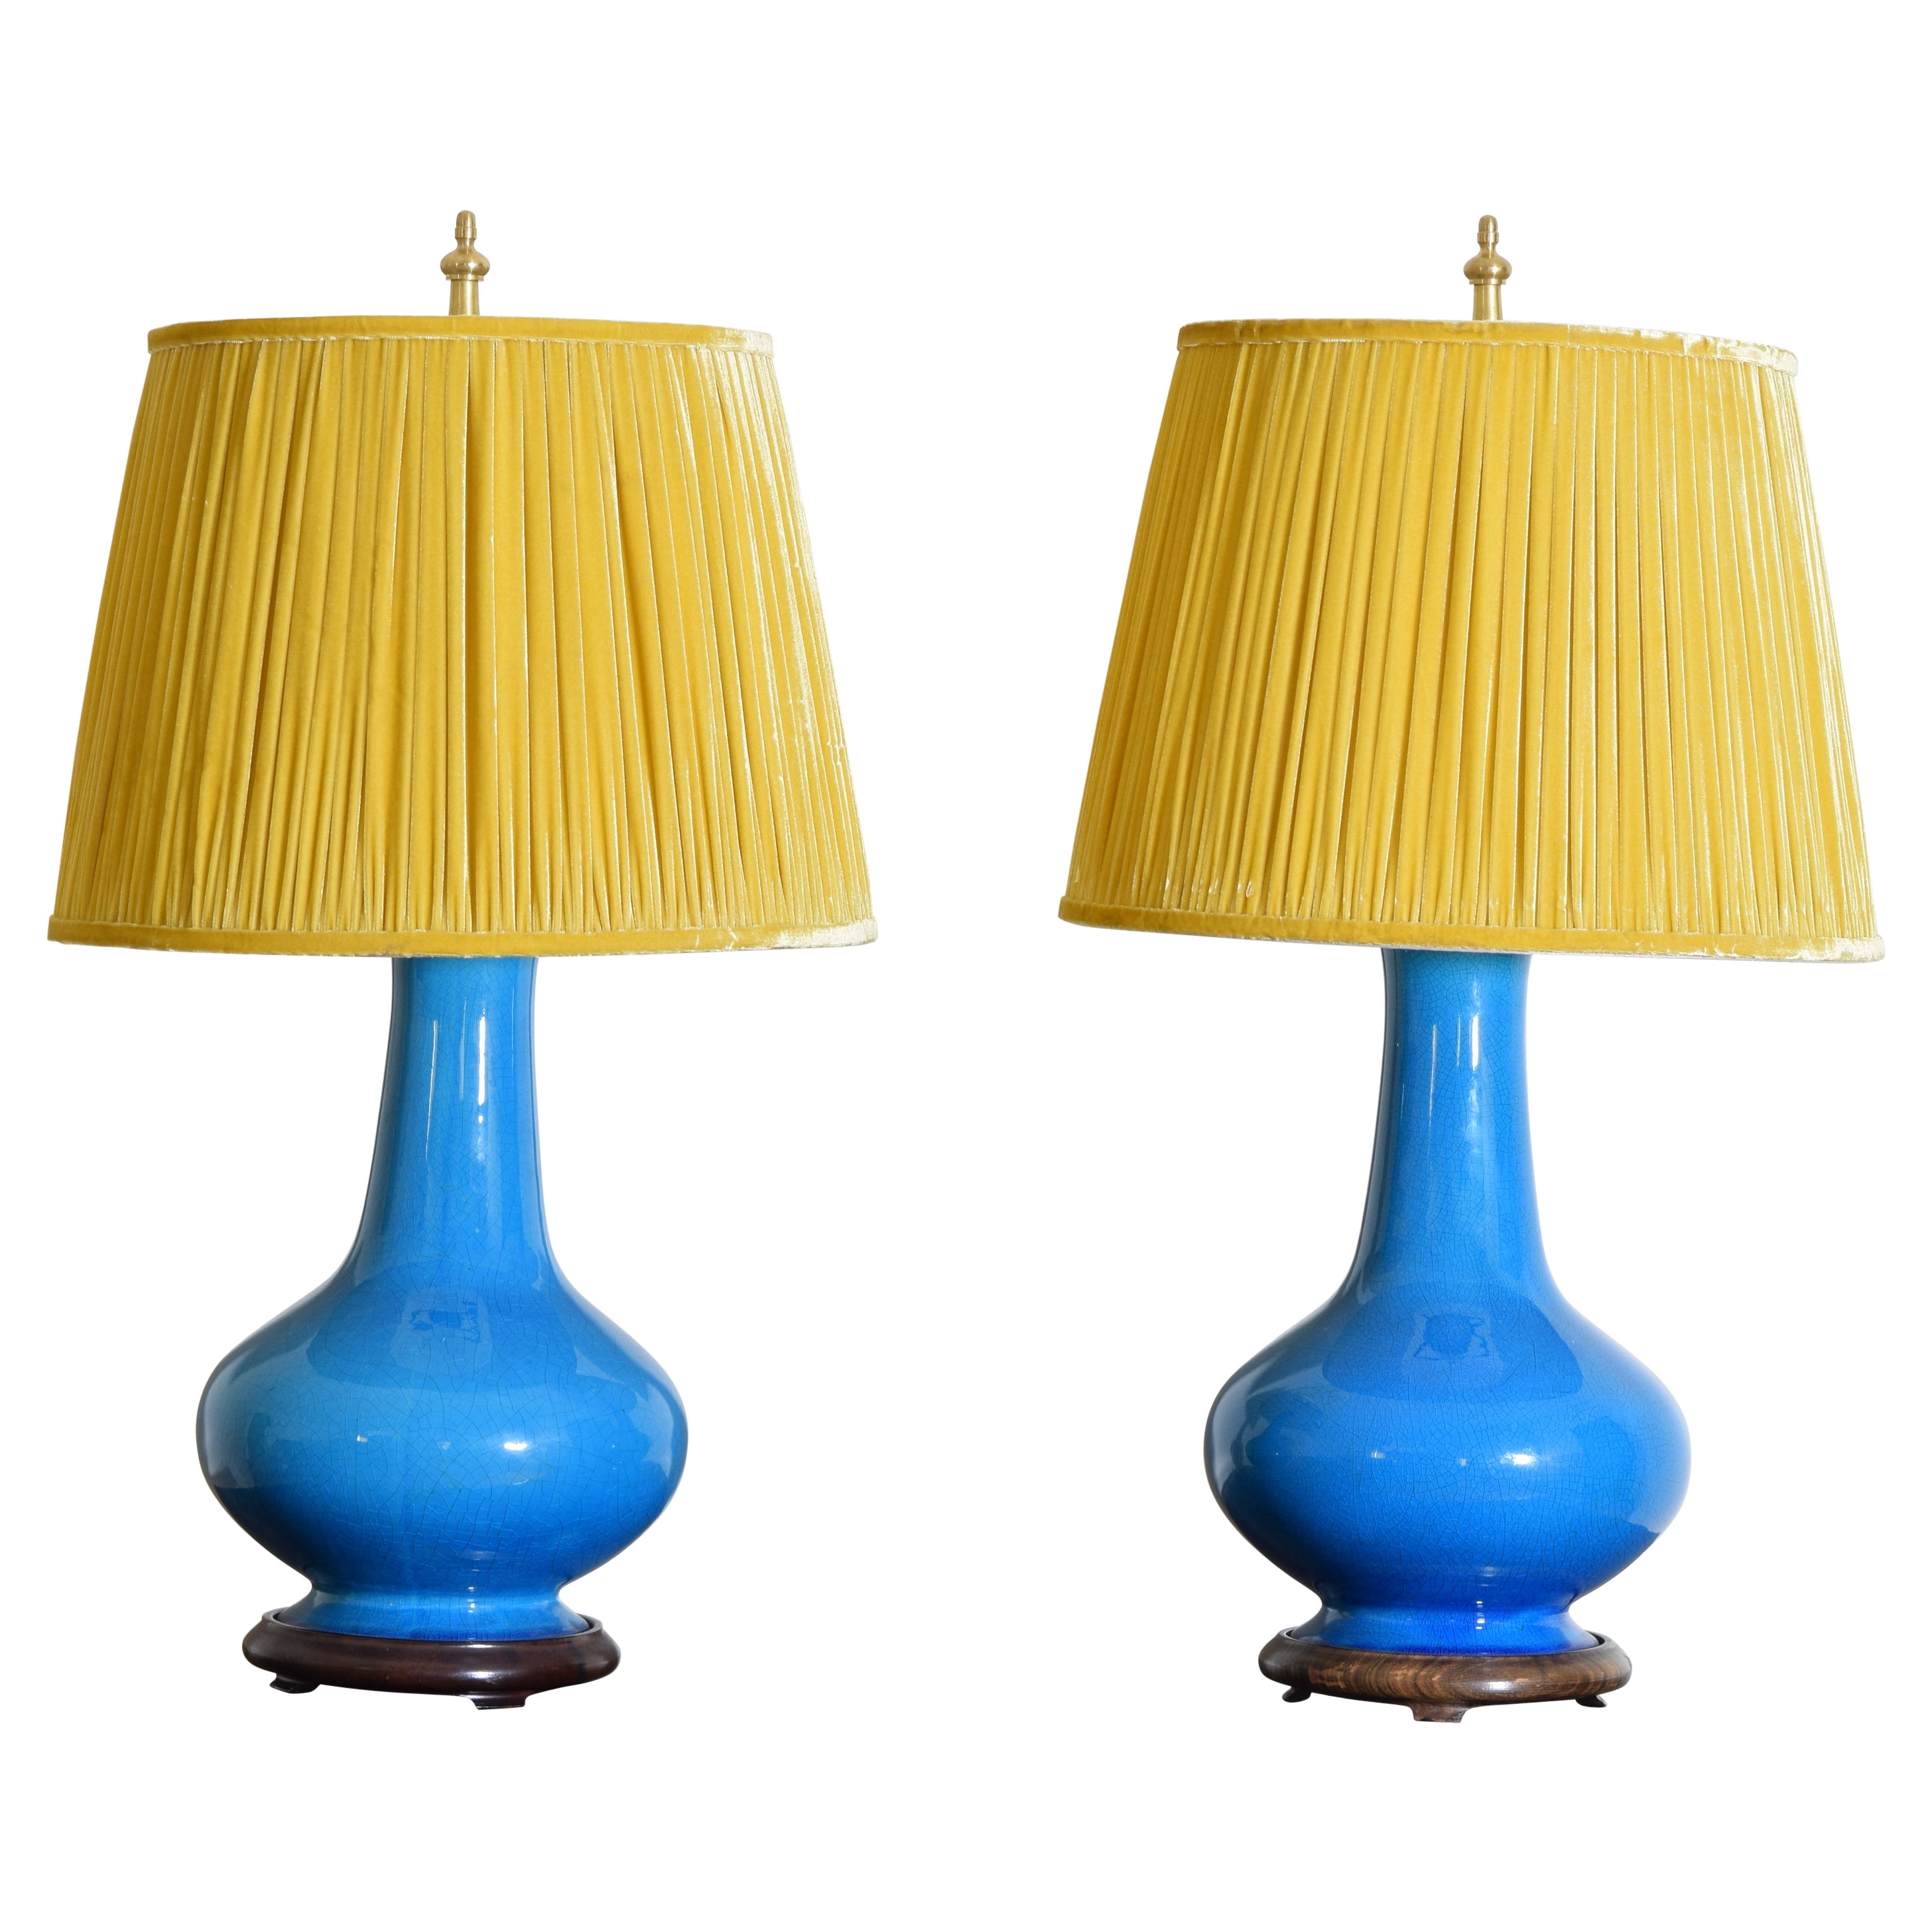 A Pair of Mid-20th Century Cerulean Blue Lamps with Custom Velvet Pleated Shades